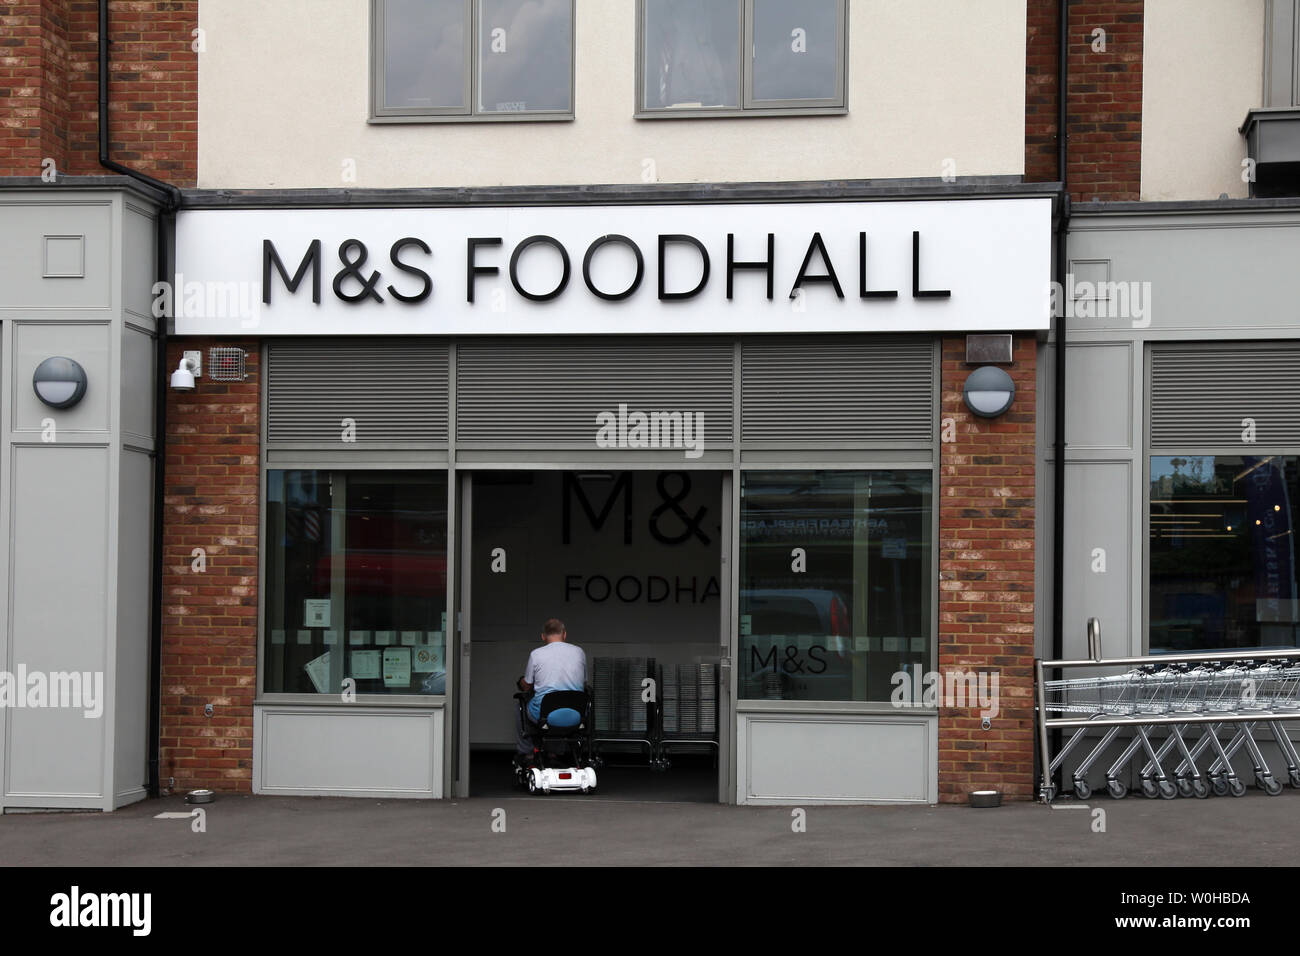 Ashtead, Surrey, UK - Marks and Spencer M&S Foodhall store front exterior on the high street with disabled customer entering on a mobility scooter Stock Photo